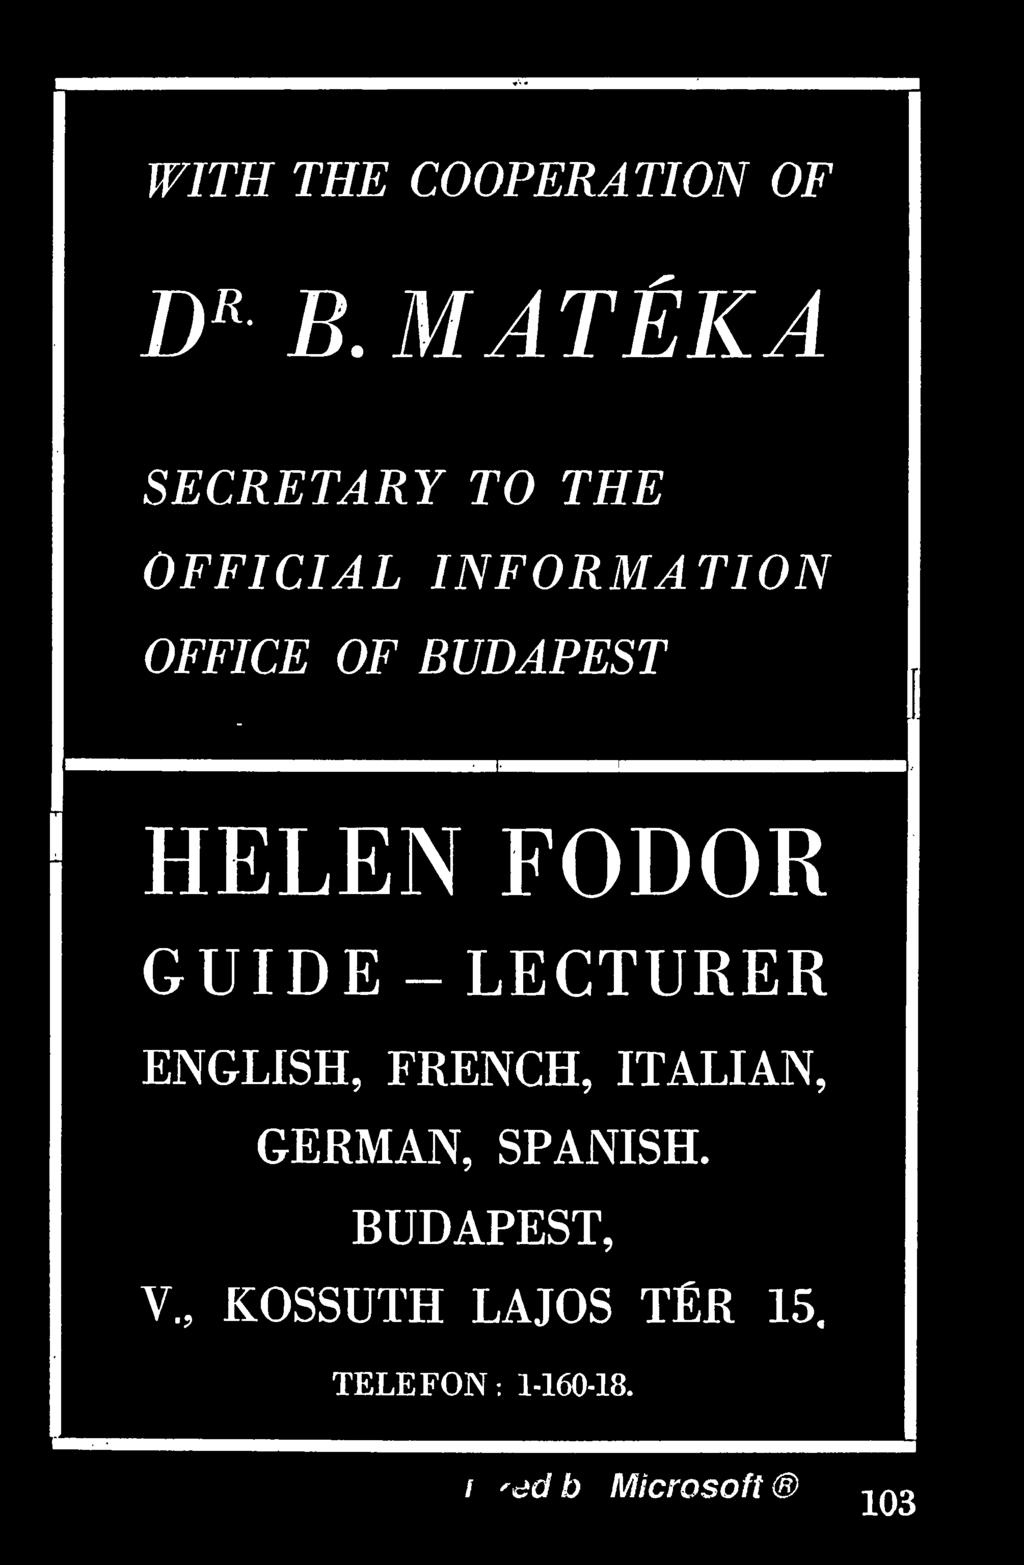 BUDAPEST HELEN FODOR GUIDE -LECTURER ENGLISH, FRENCH,